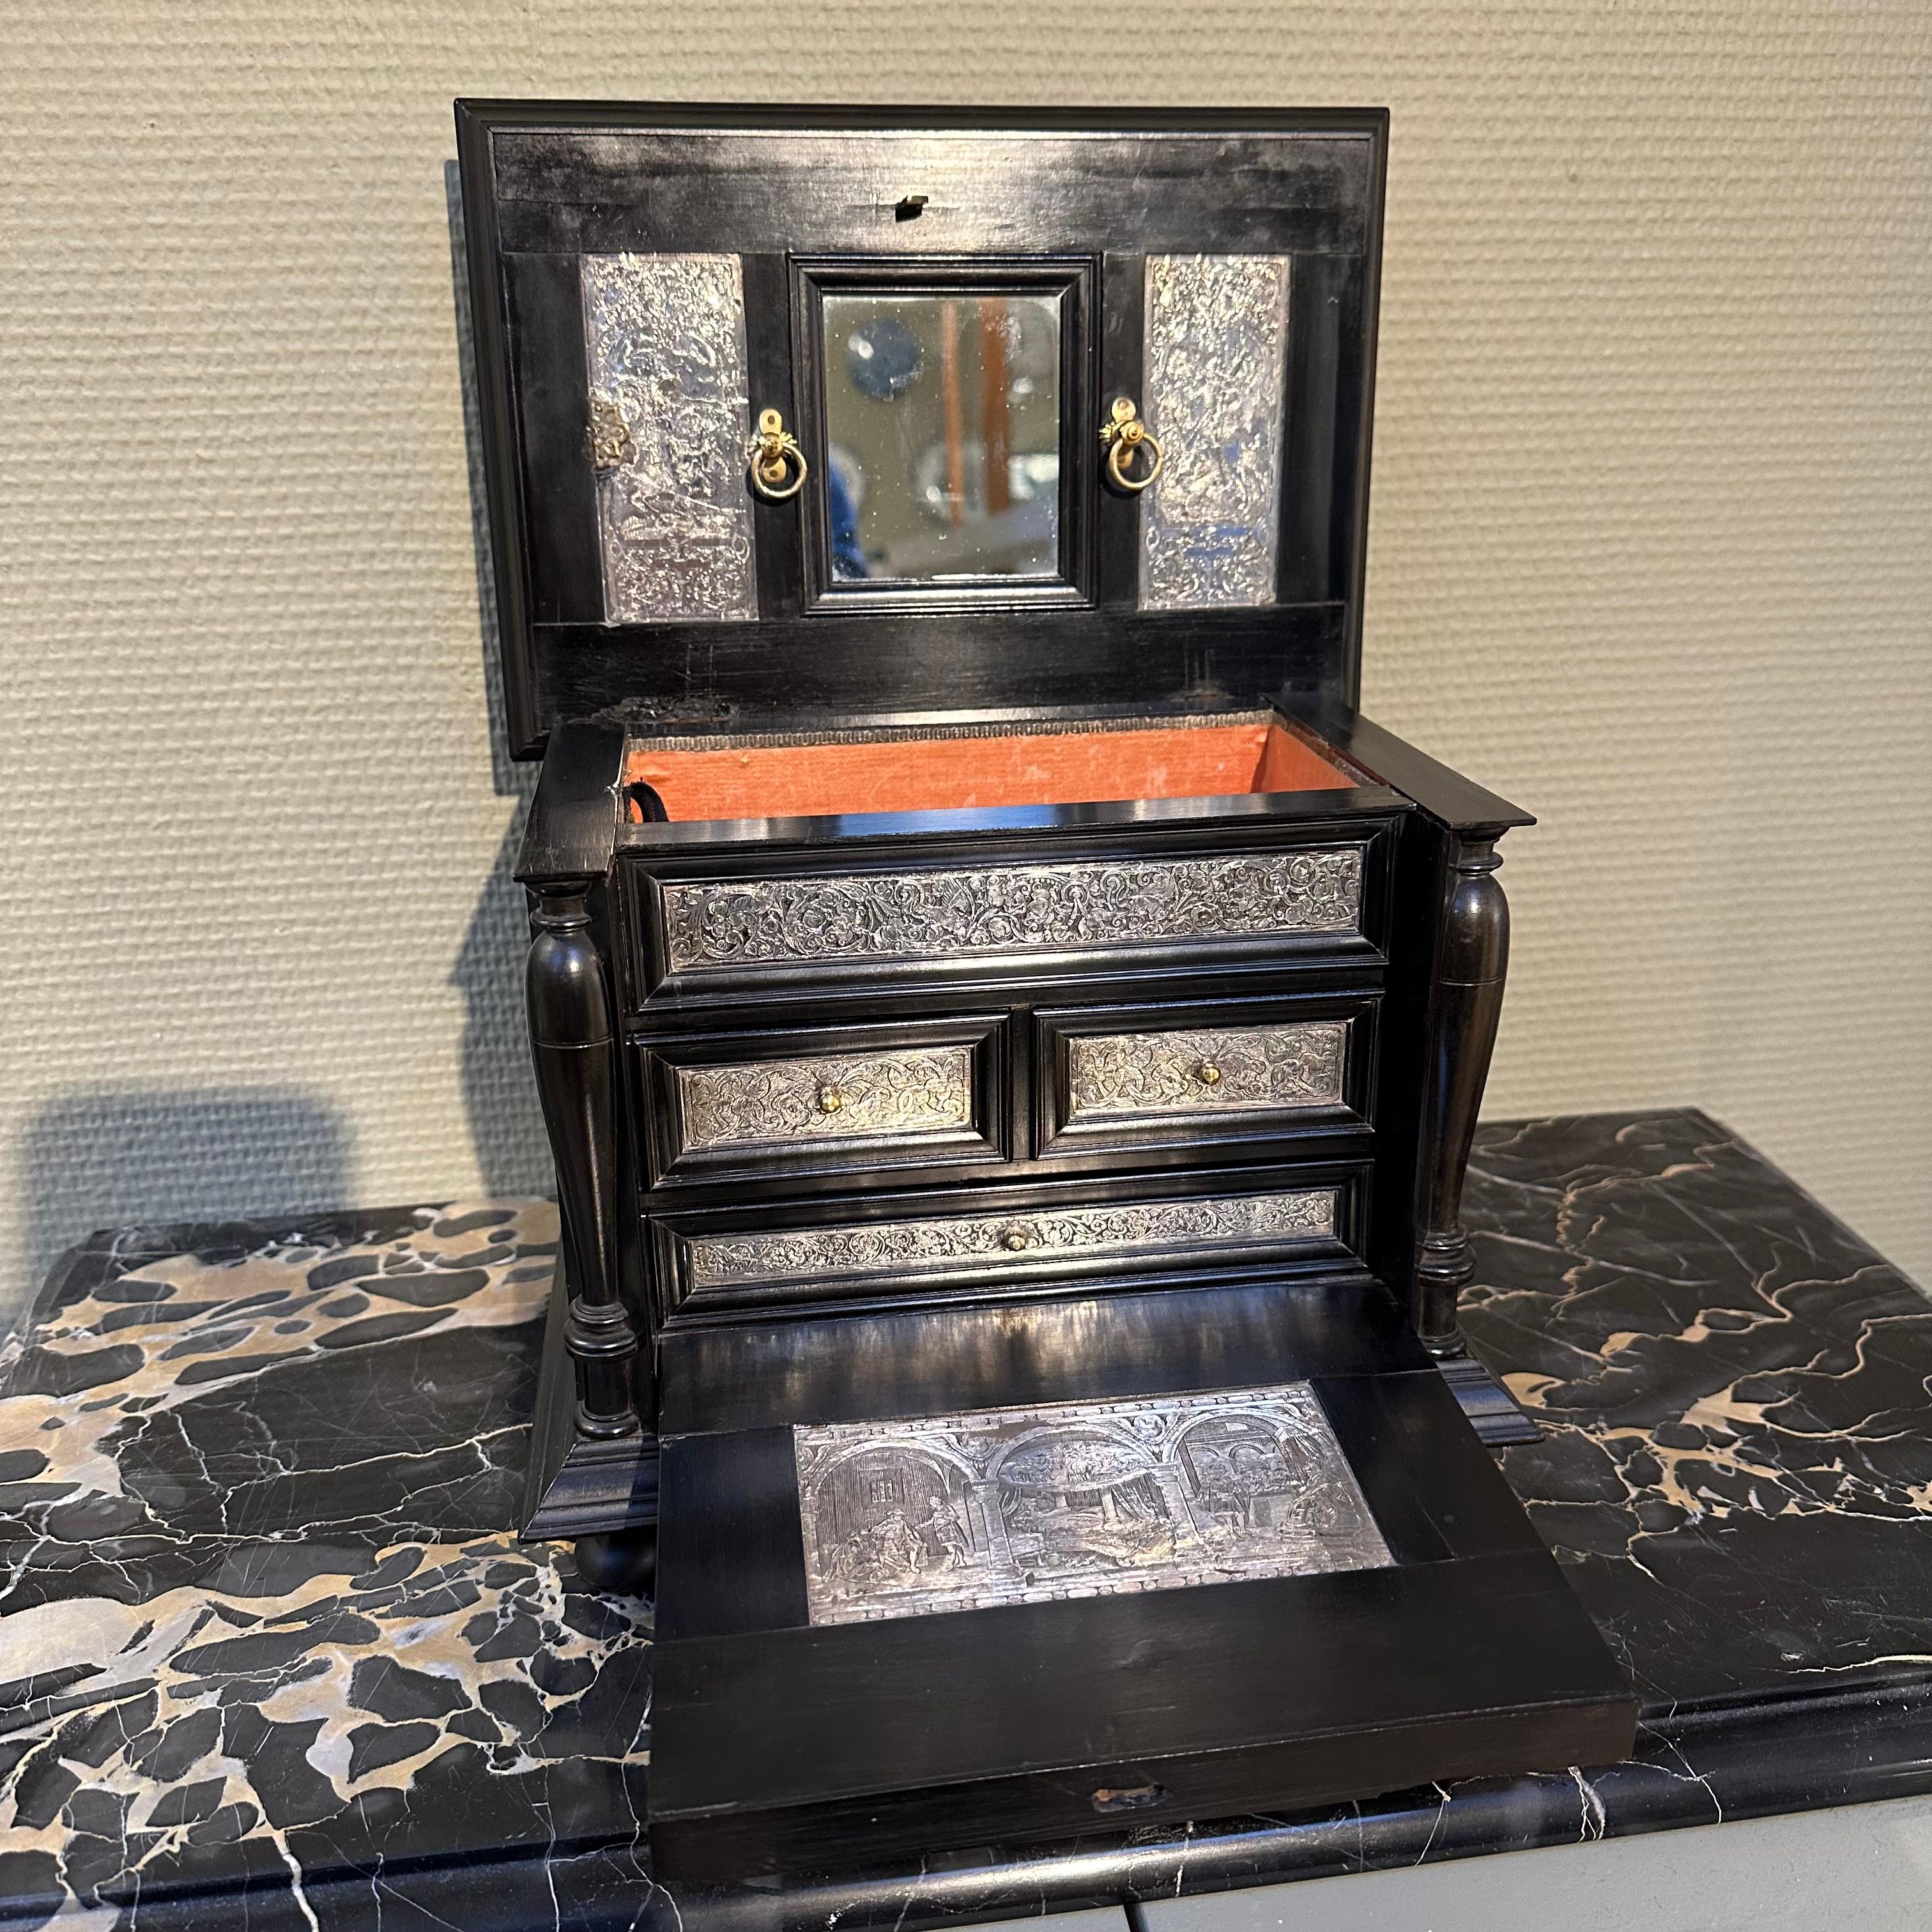 Inlay Rare 17th Century Baroque Ebony with Silver Cabinet, Antwerp, Wunderkammer For Sale